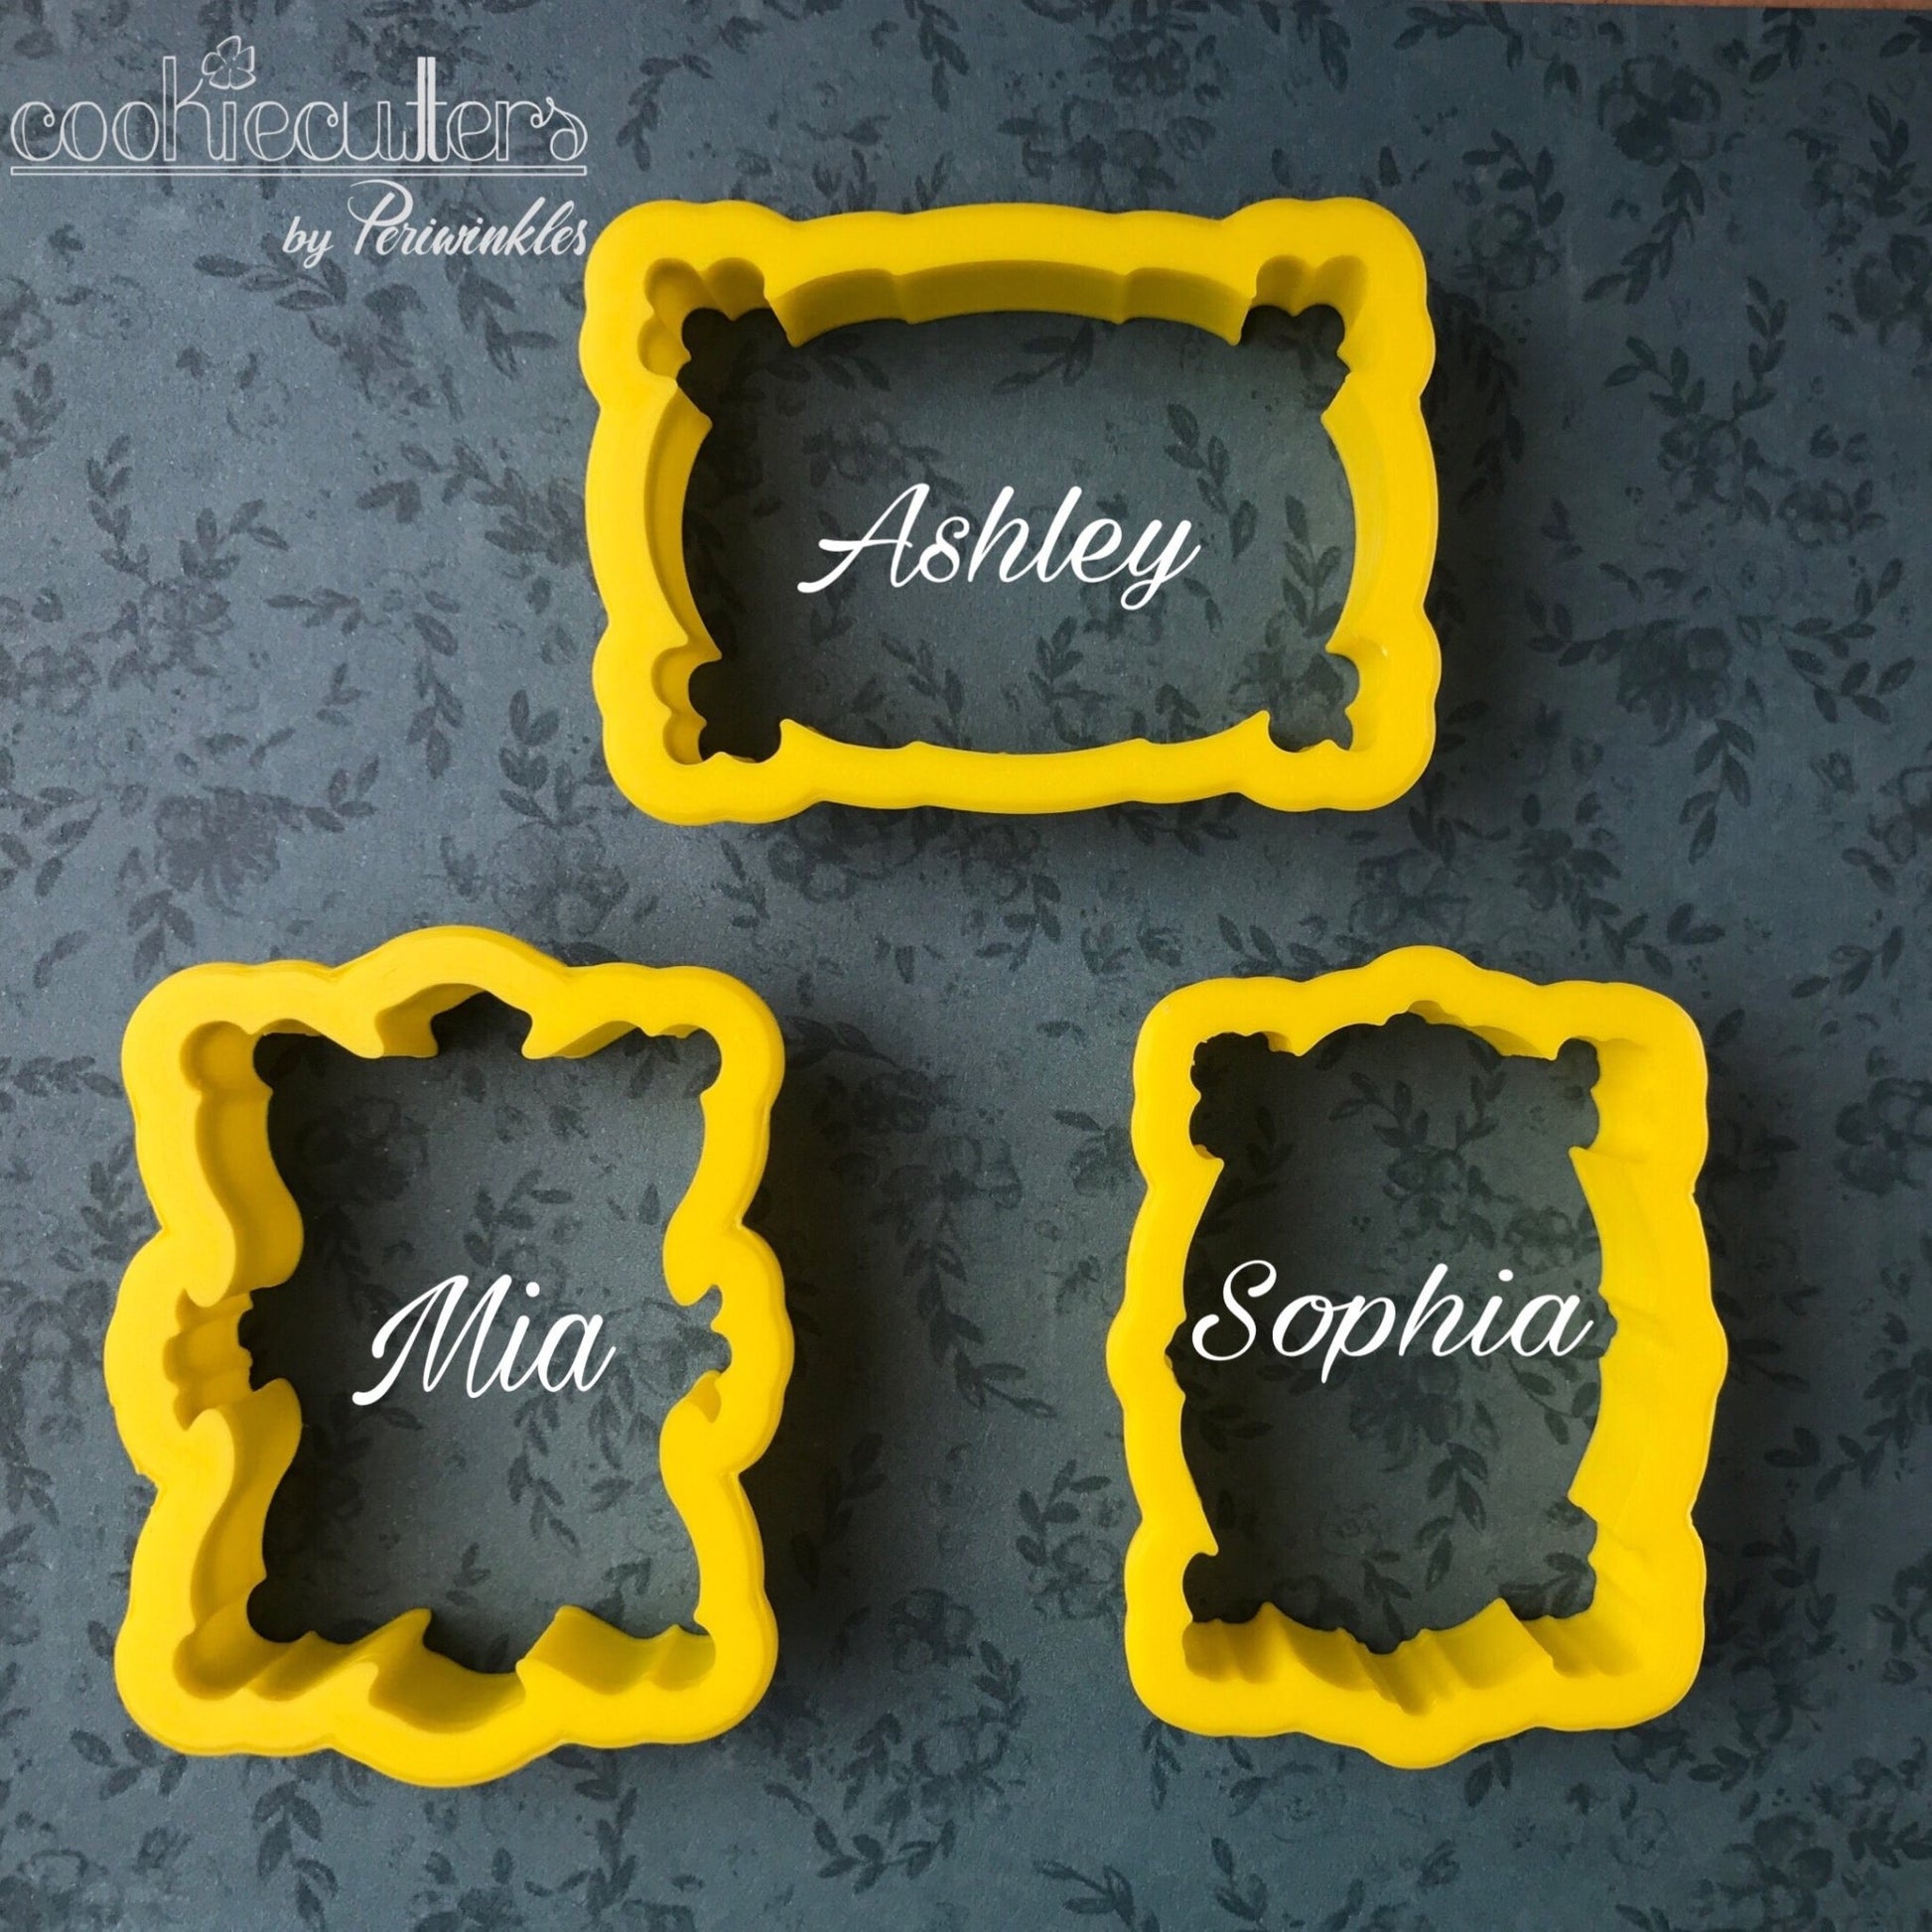 Mia Plaque Cookie Cutter - Periwinkles Cutters